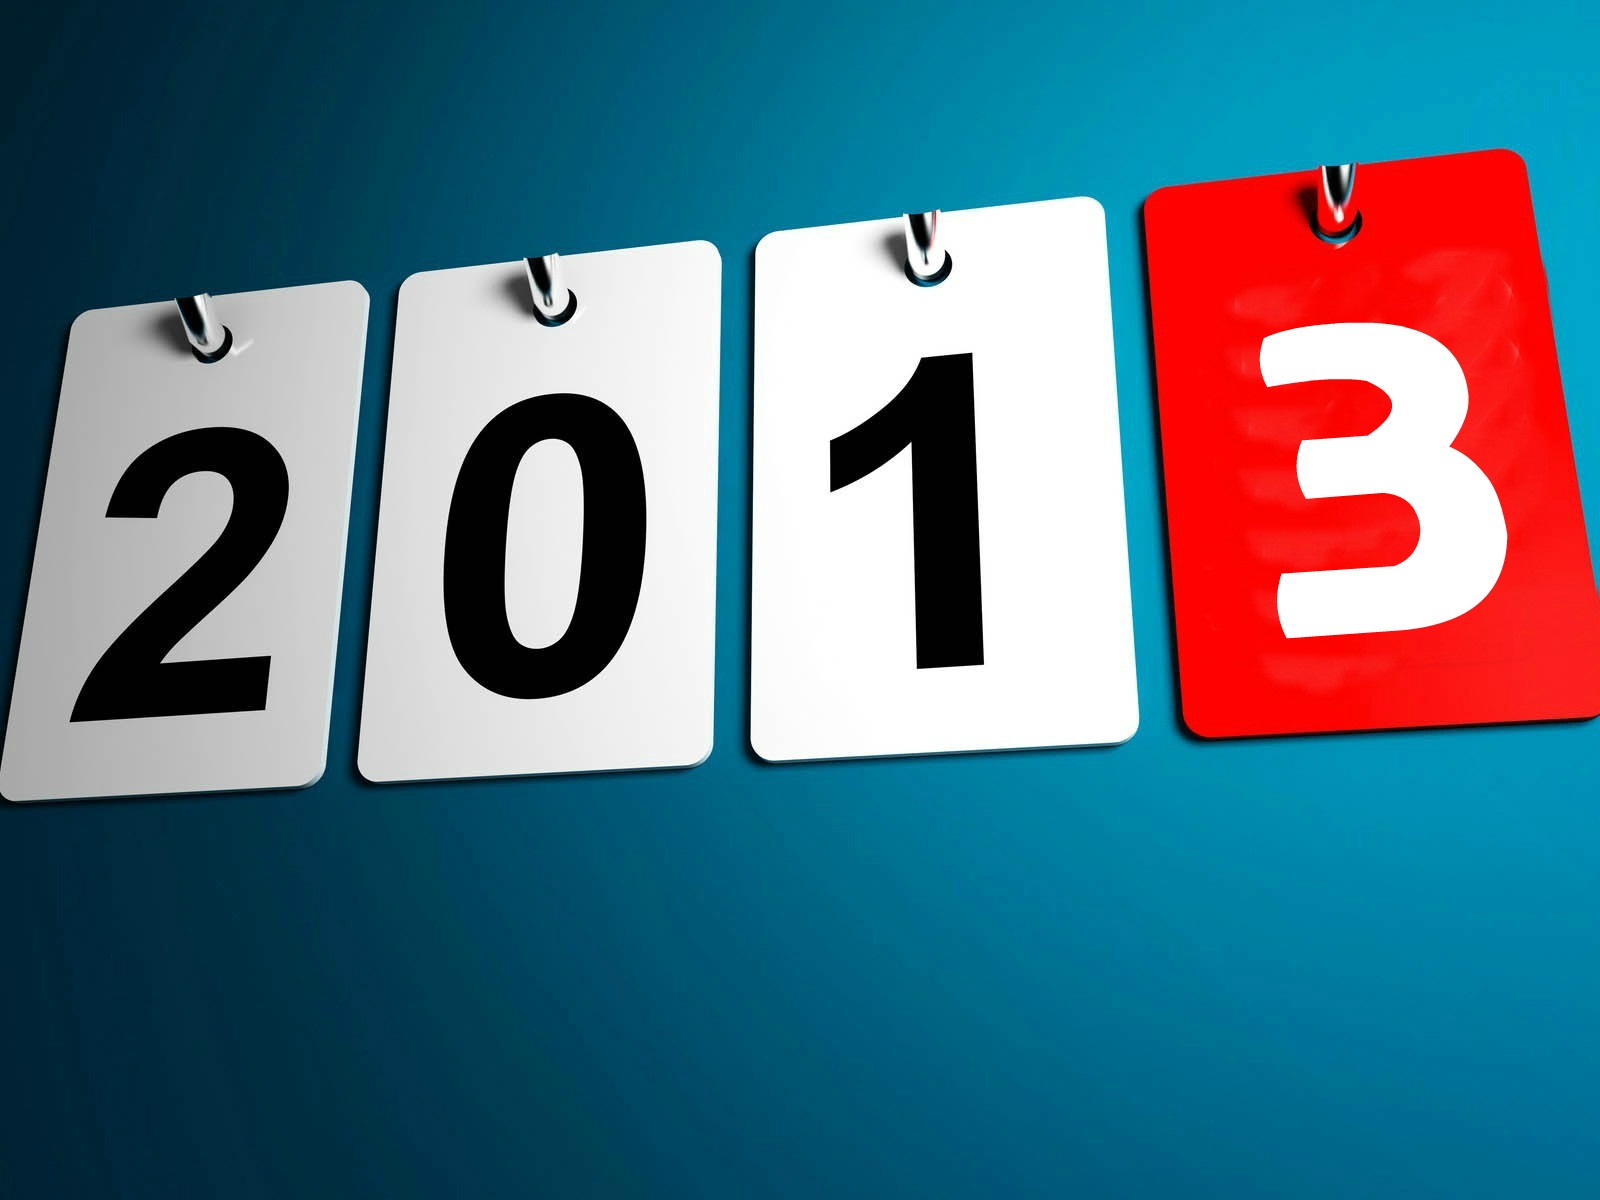 2013 Happy New Year HD wallpapers #20 - 1600x1200